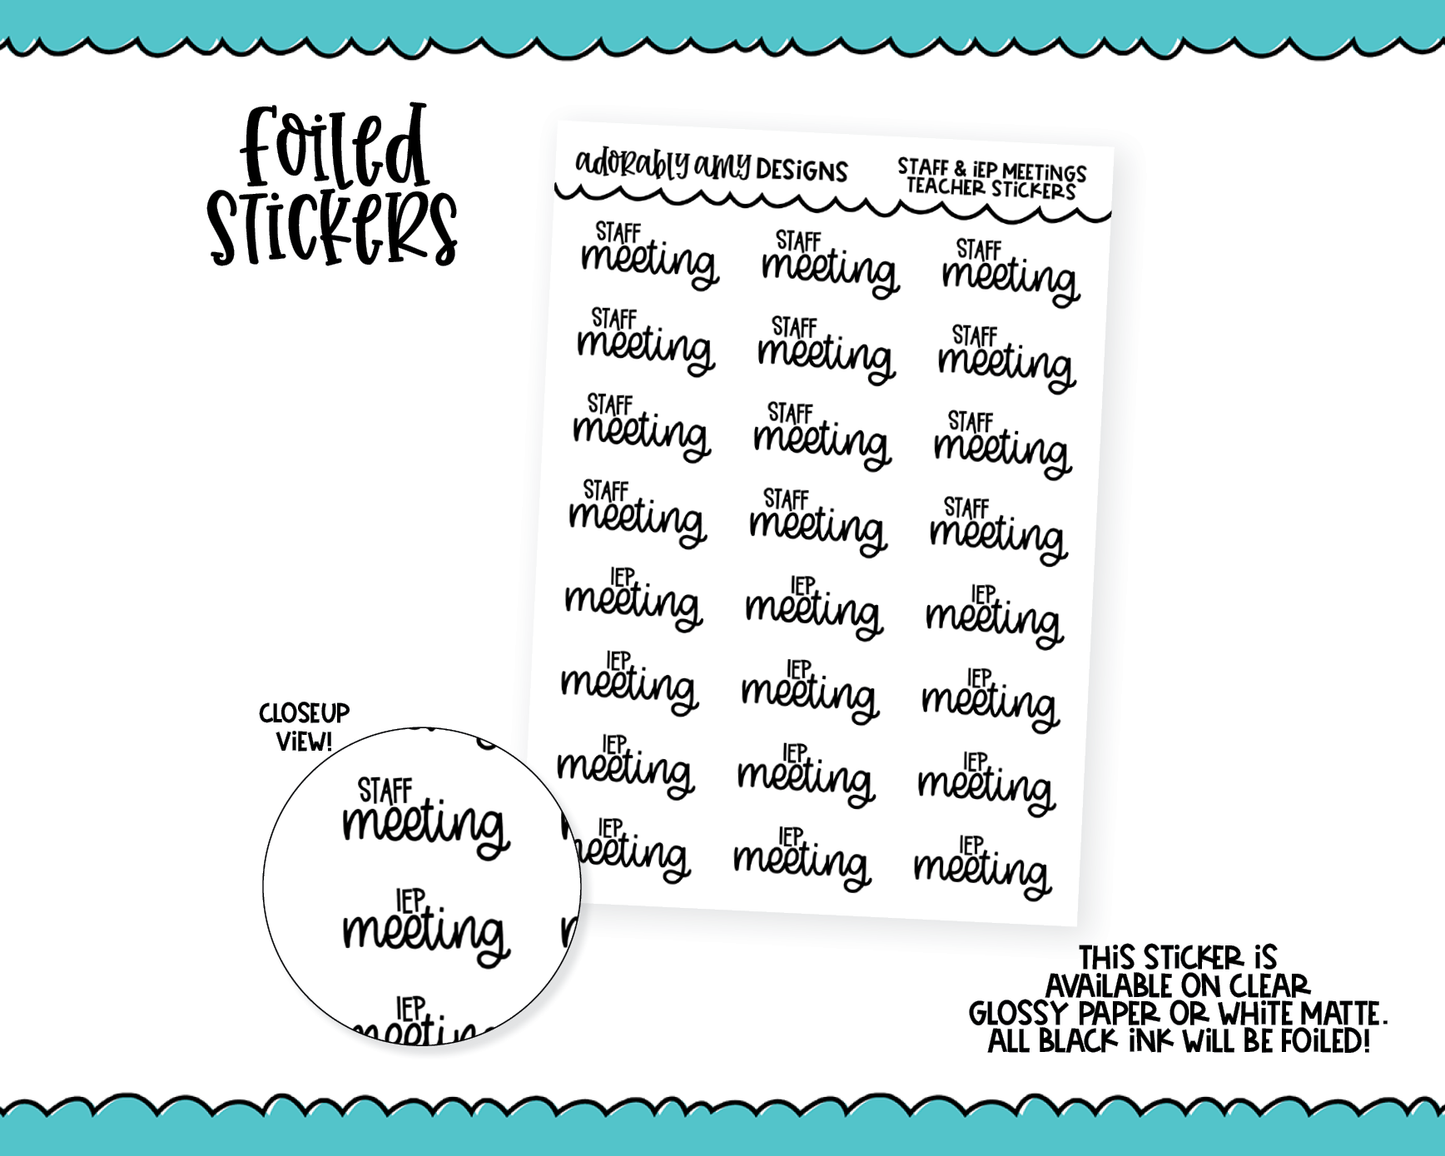 Foiled Teacher Staff Meeting and IEP Meeting V5 Reminder Typography Planner Stickers for any Planner or Insert